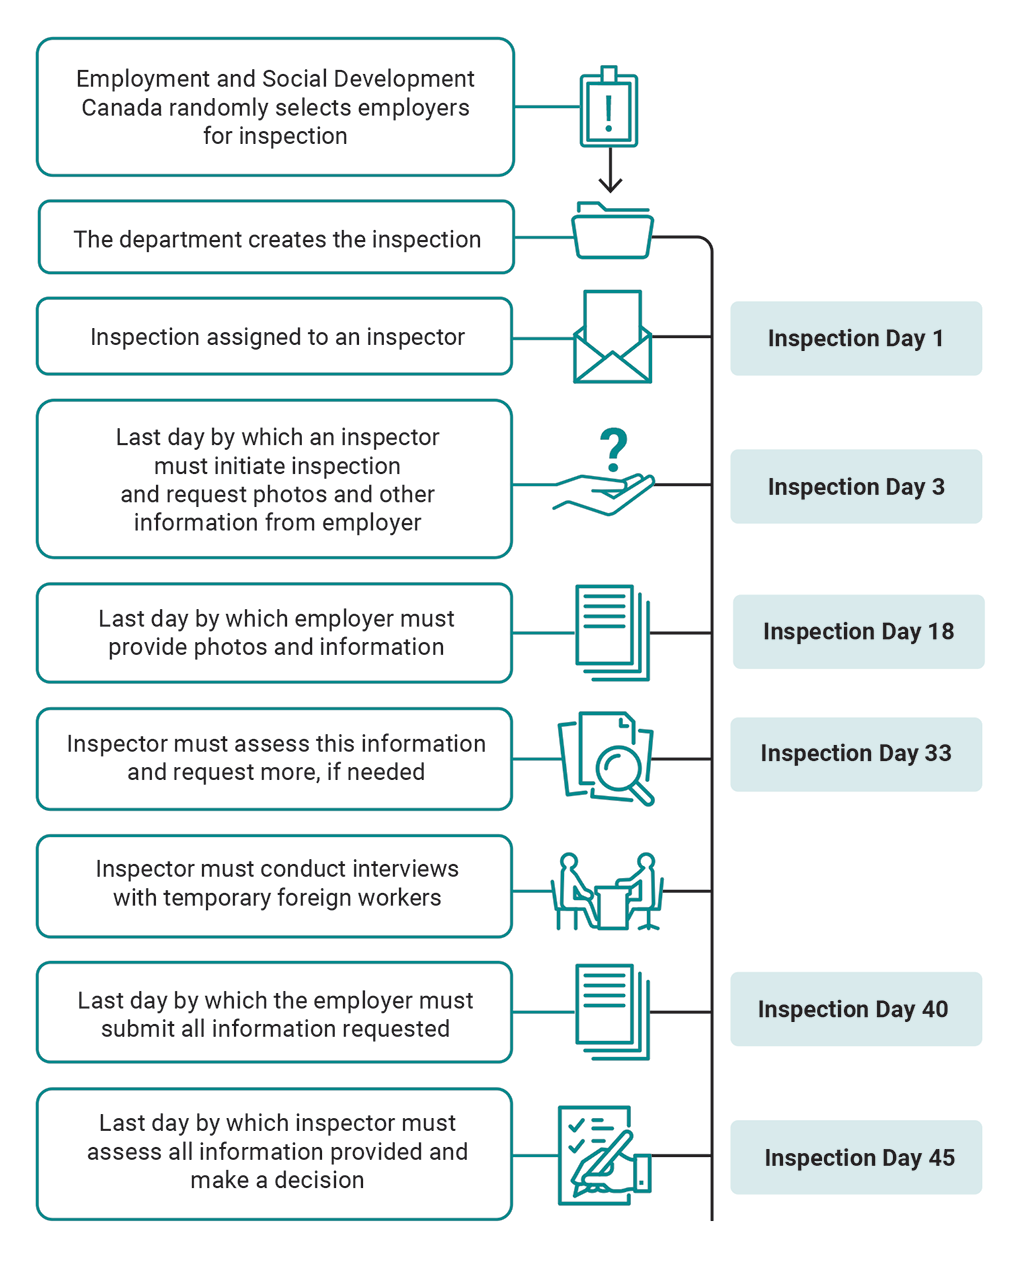 Chart showing Employment and Social Development Canada’s post-quarantine inspection process